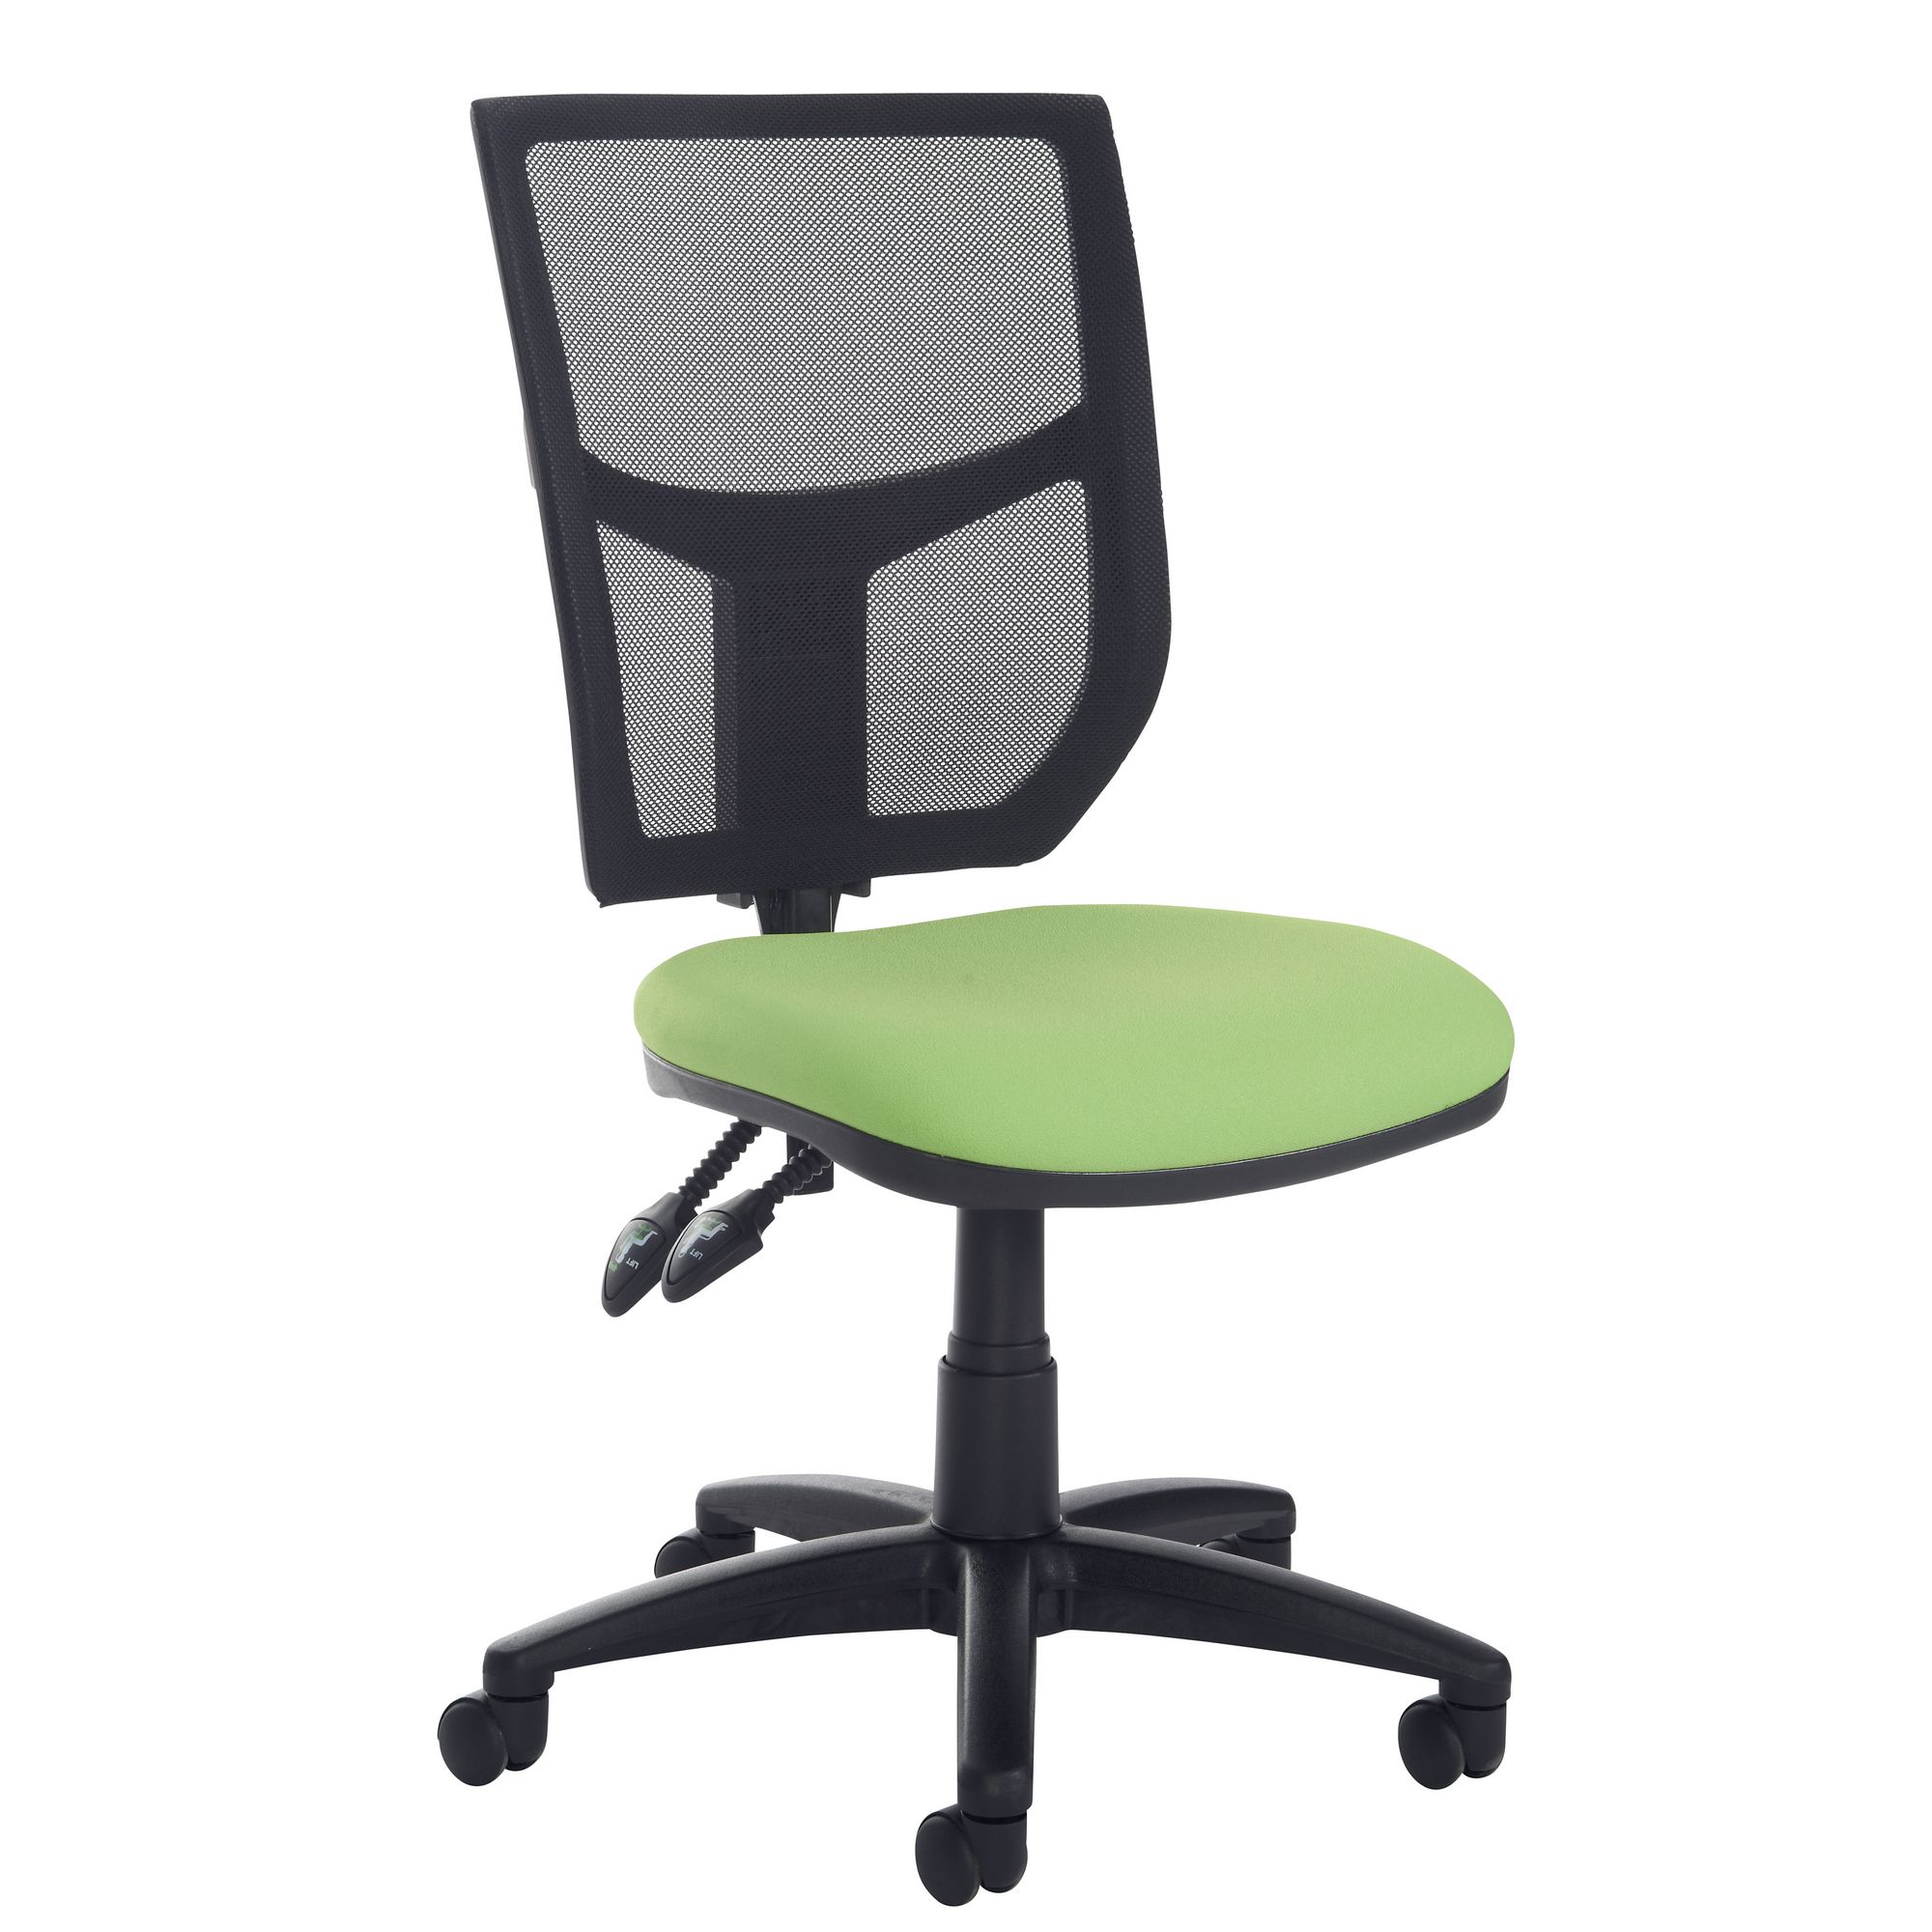 Altino High Back Op Chair Noarms Green